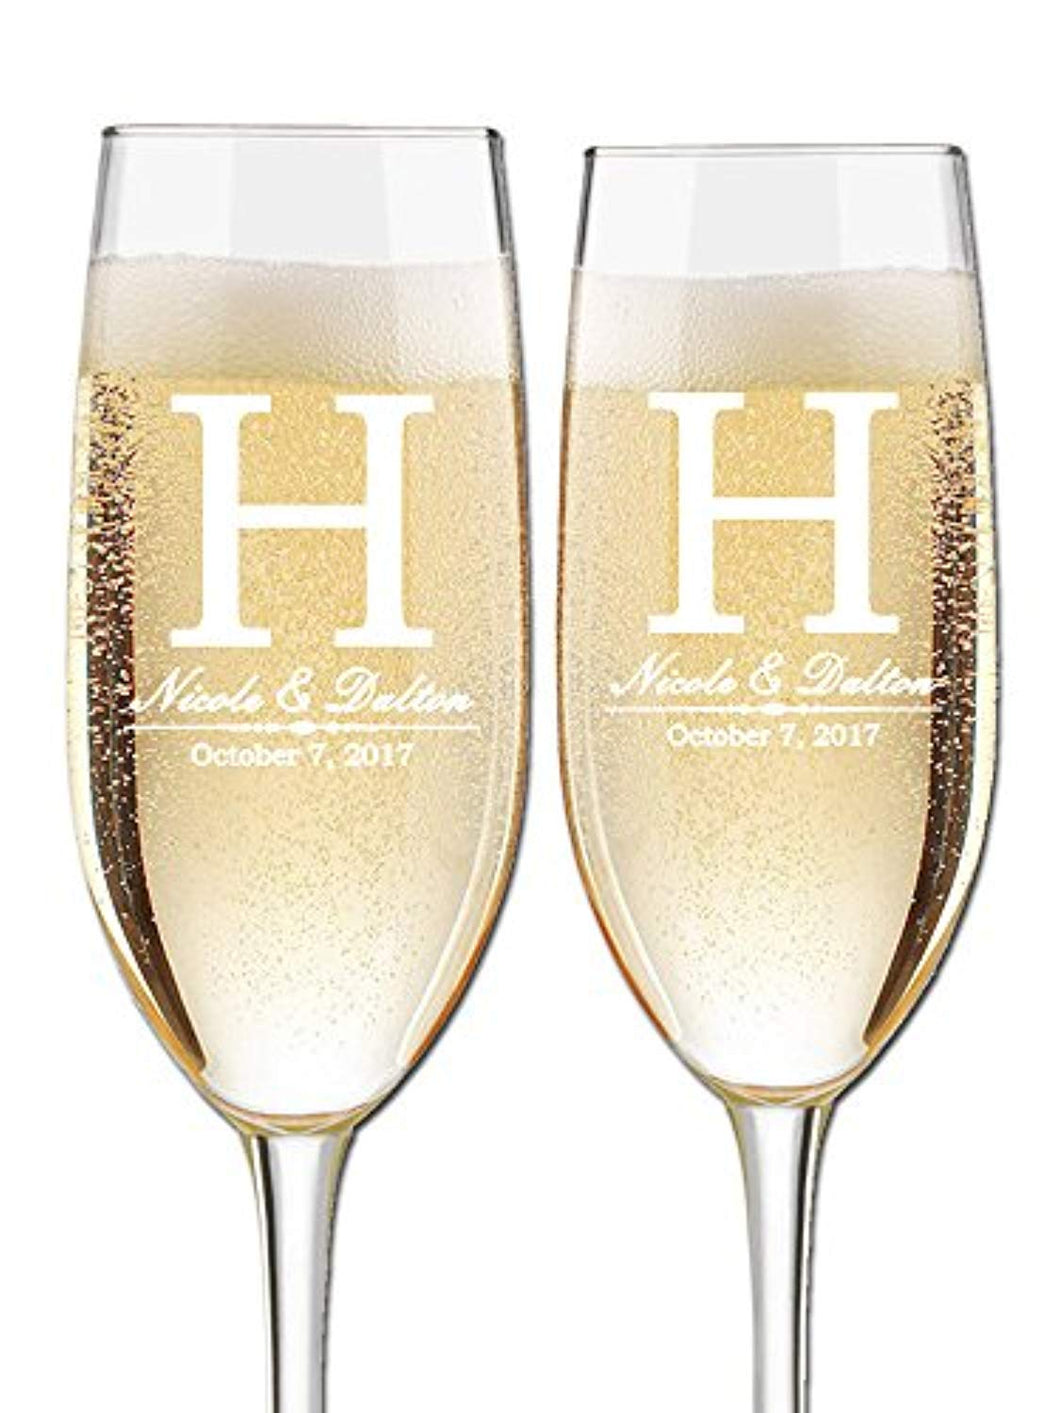 Set of 2, Wedding Champagne Flutes, Personalized Champagne Glasses